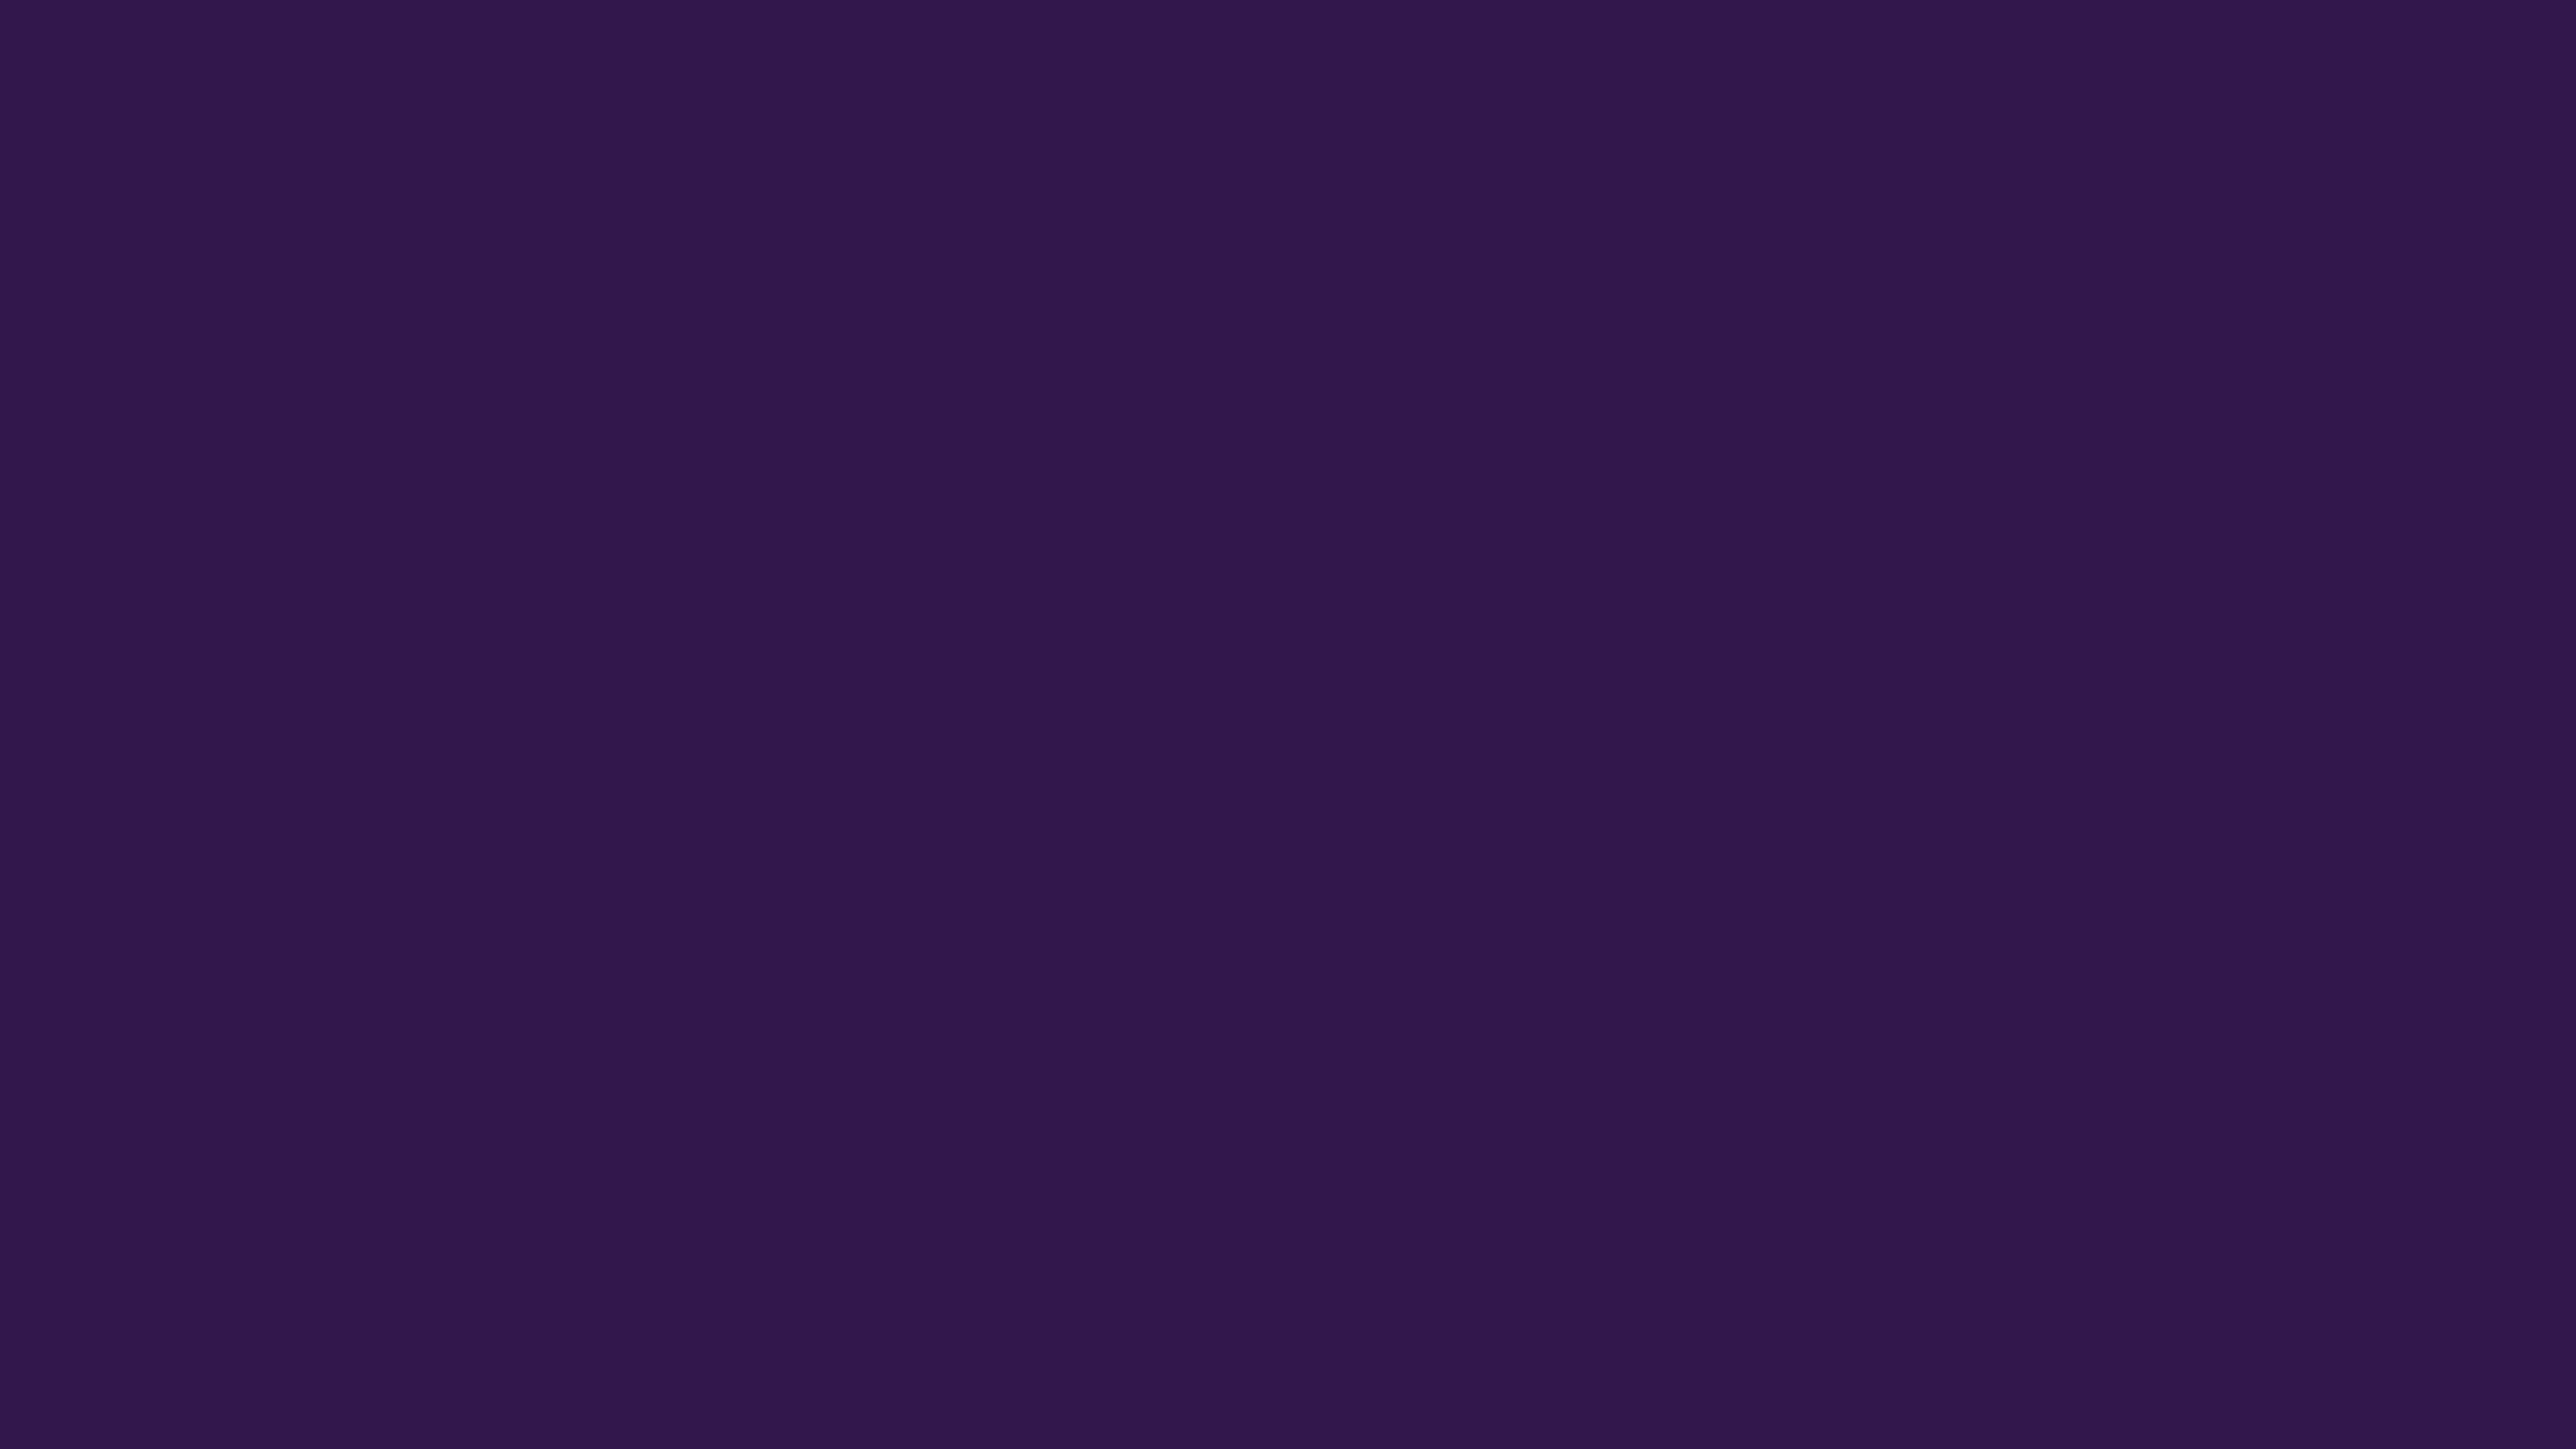 4096x2304 Russian Violet Solid Color Background